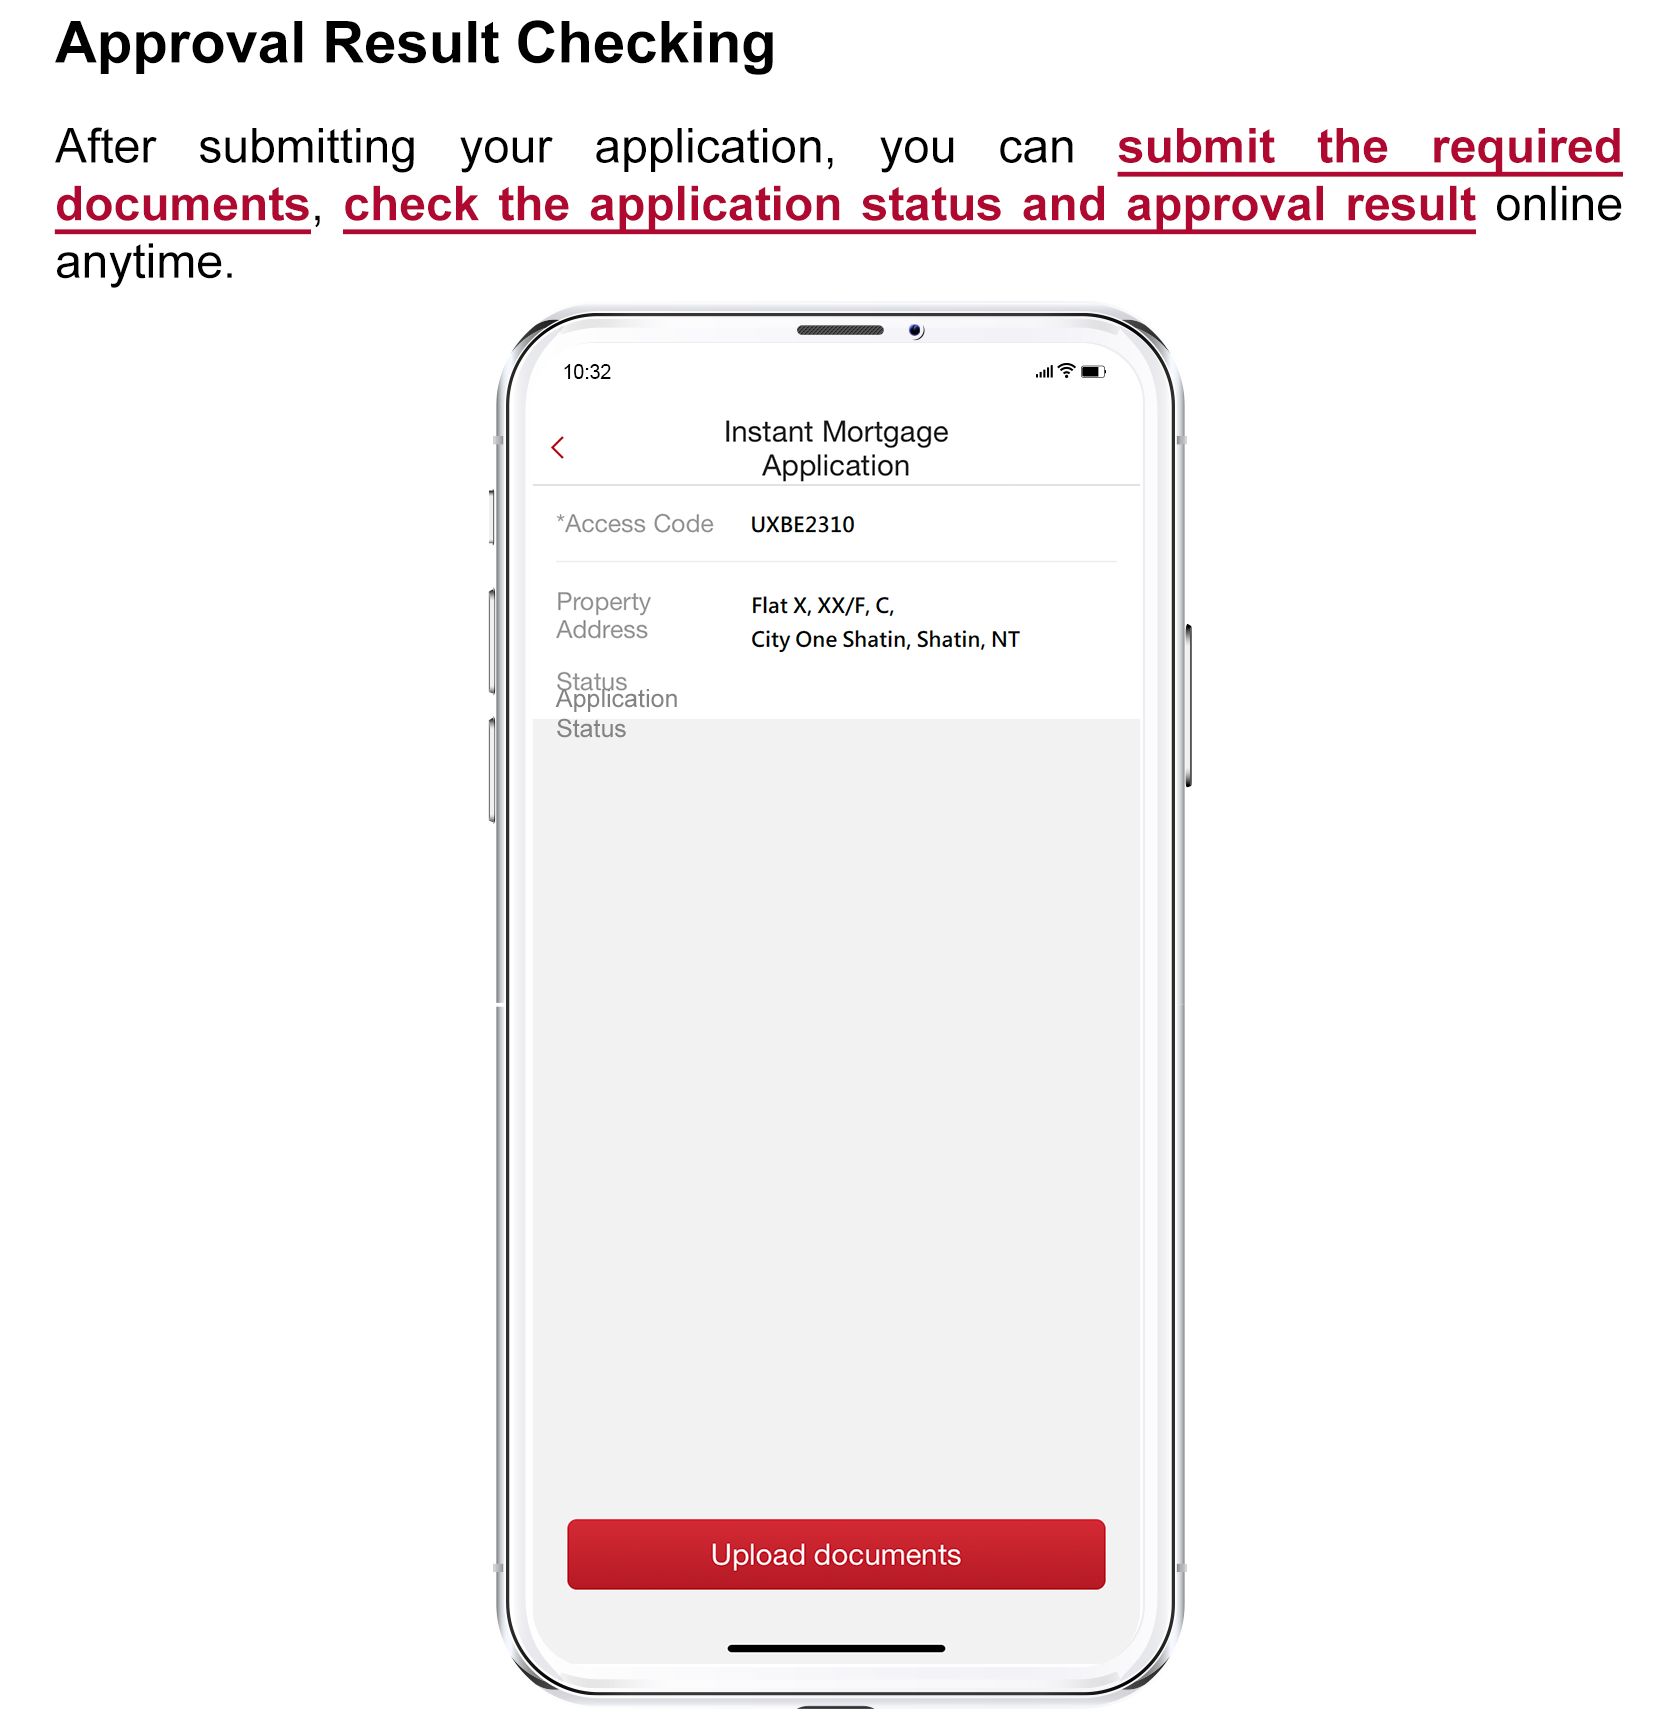 Approval Result Checking